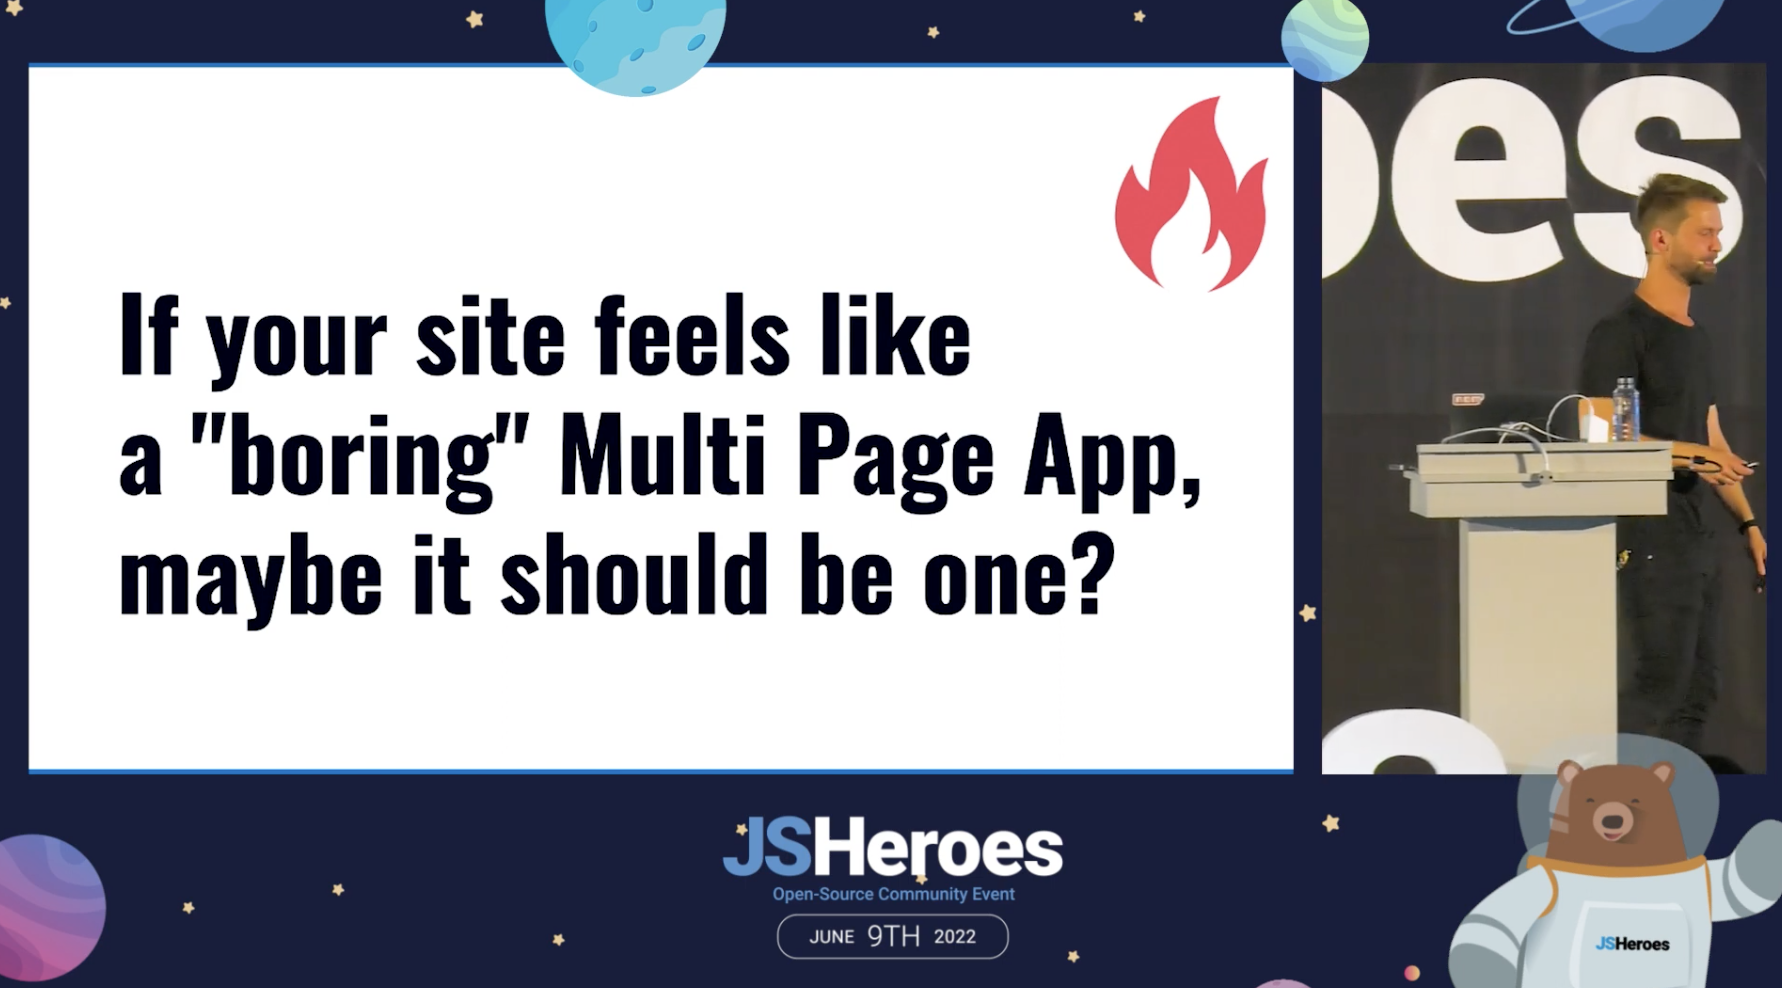 Stefan on stage: "If your site feels like a "boring" Multi Page App, maybe it should be one?"